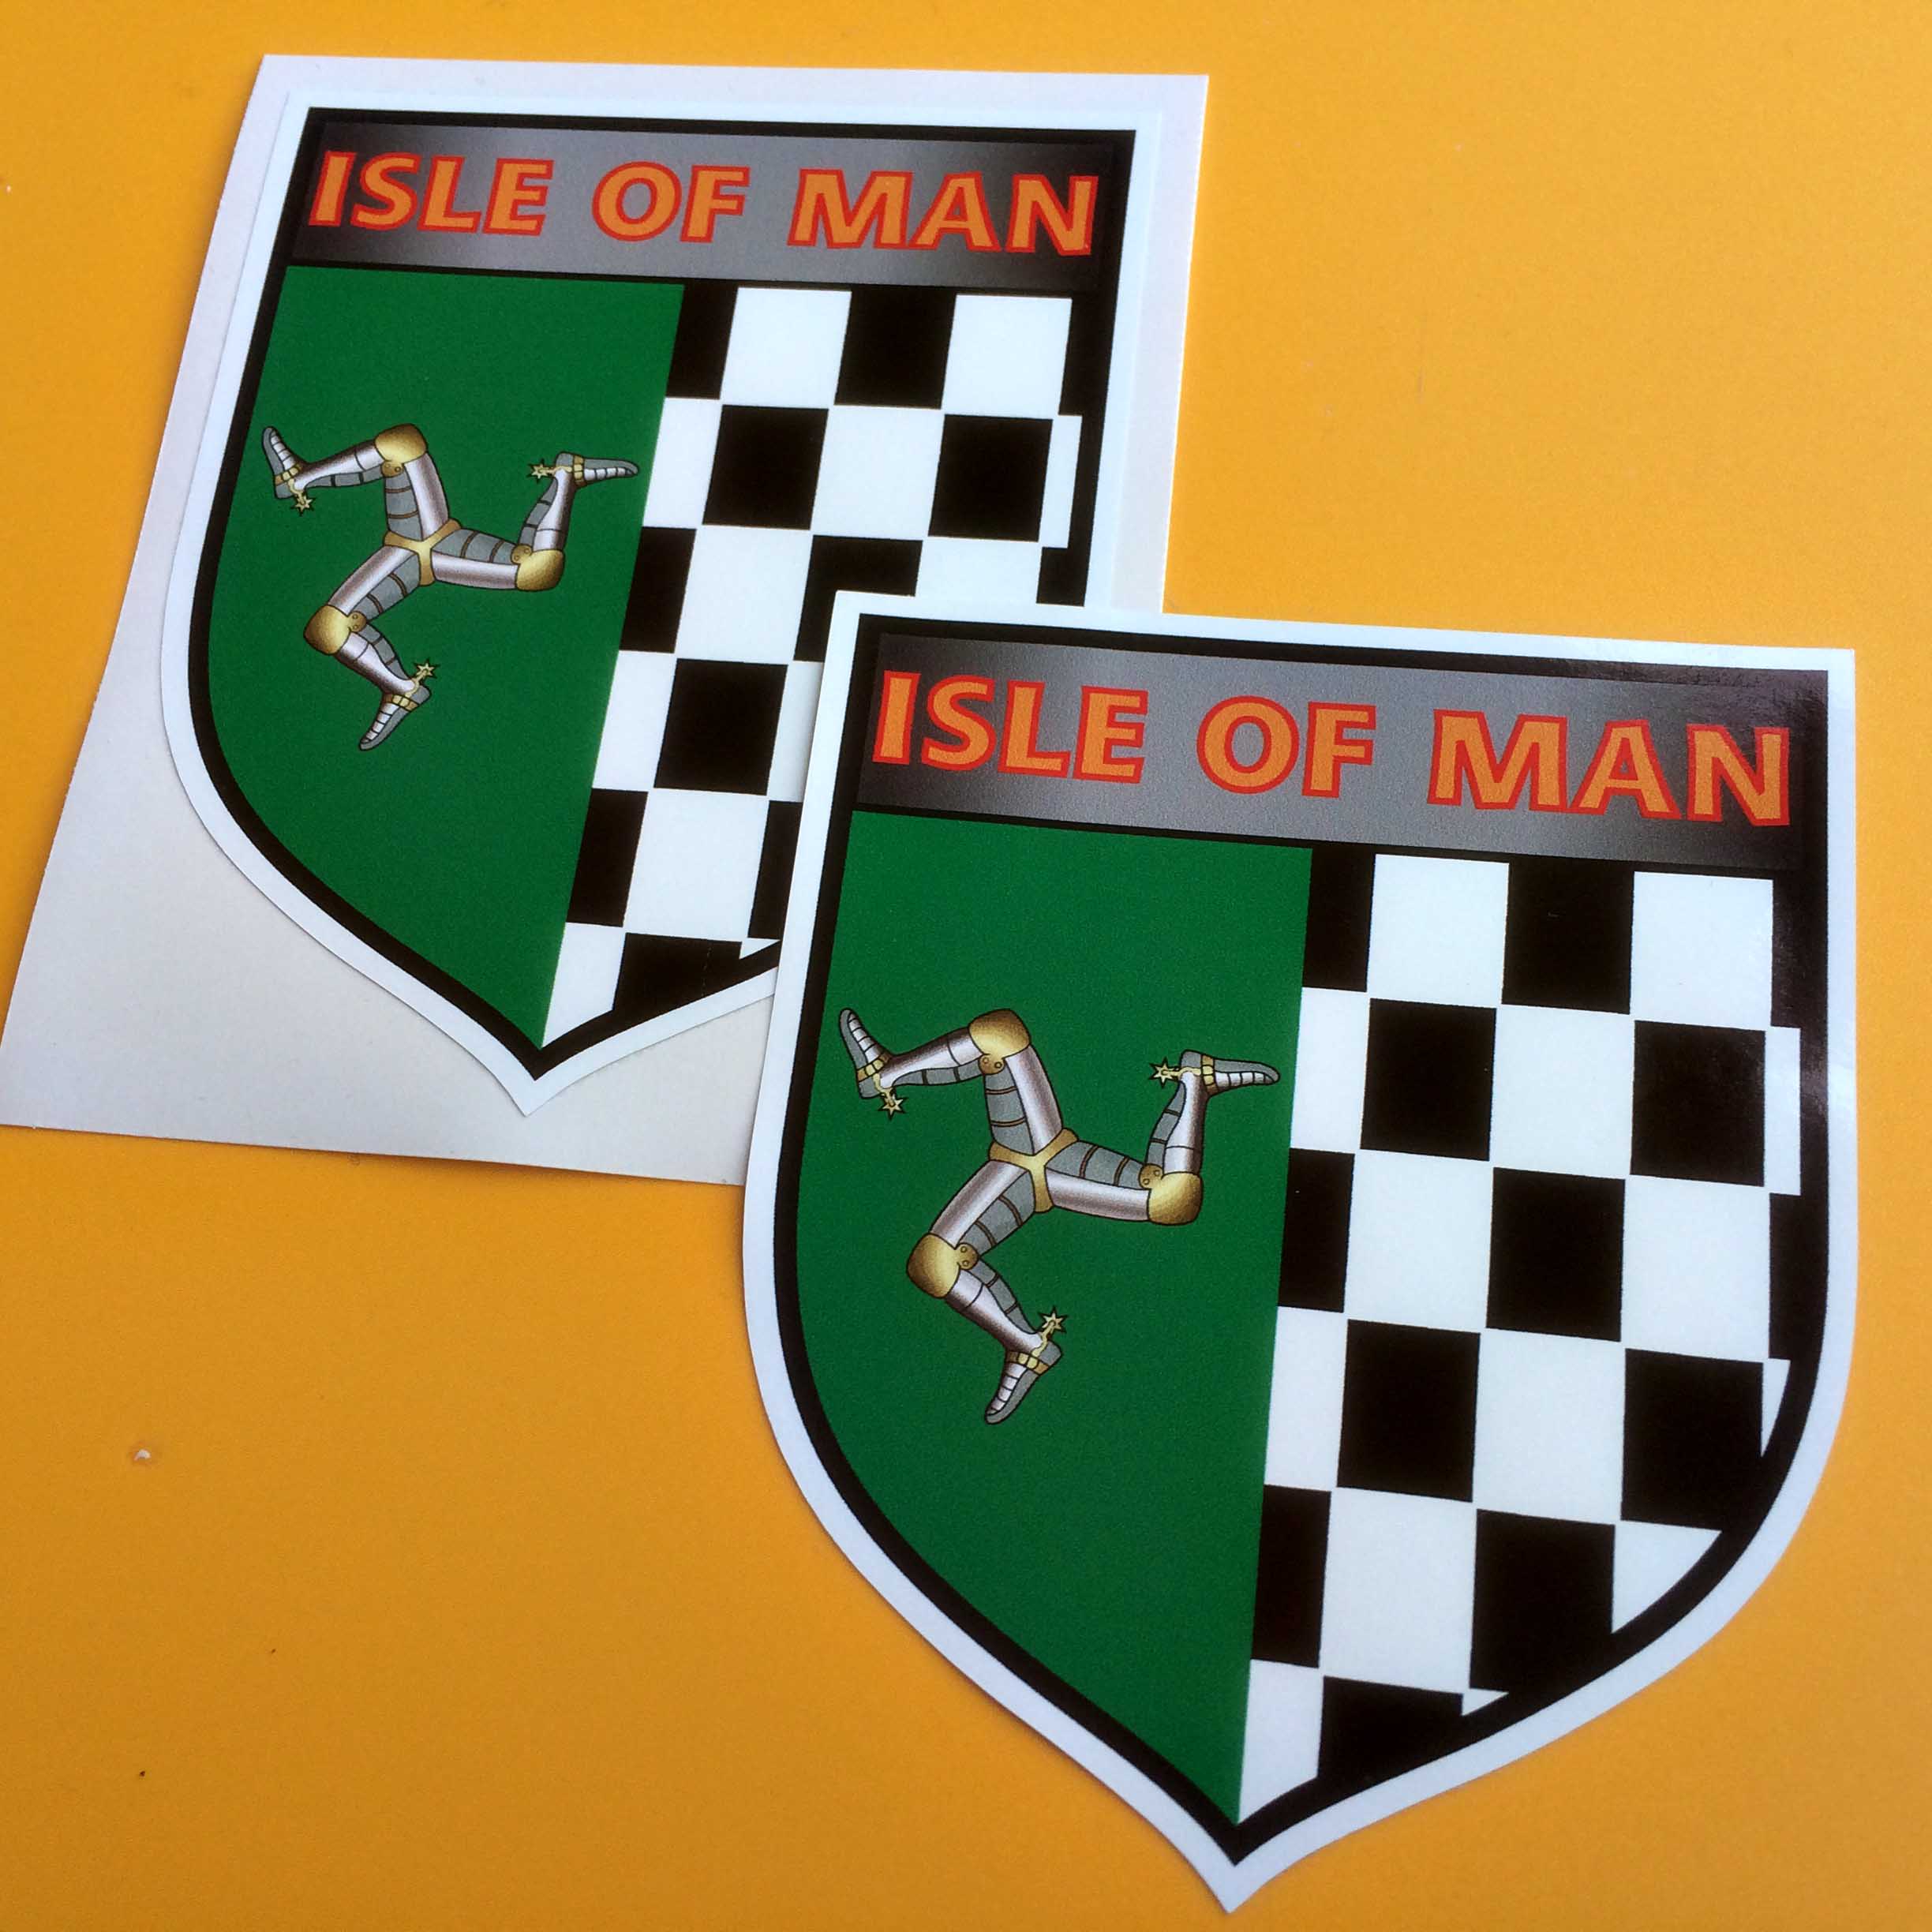 ISLE OF MAN CHEQUERED SHIELD STICKERS. A shield with a triskelion on a green background and black and white chequer. Isle Of Man in yellow and red lettering on a grey background is across the top of the shield.